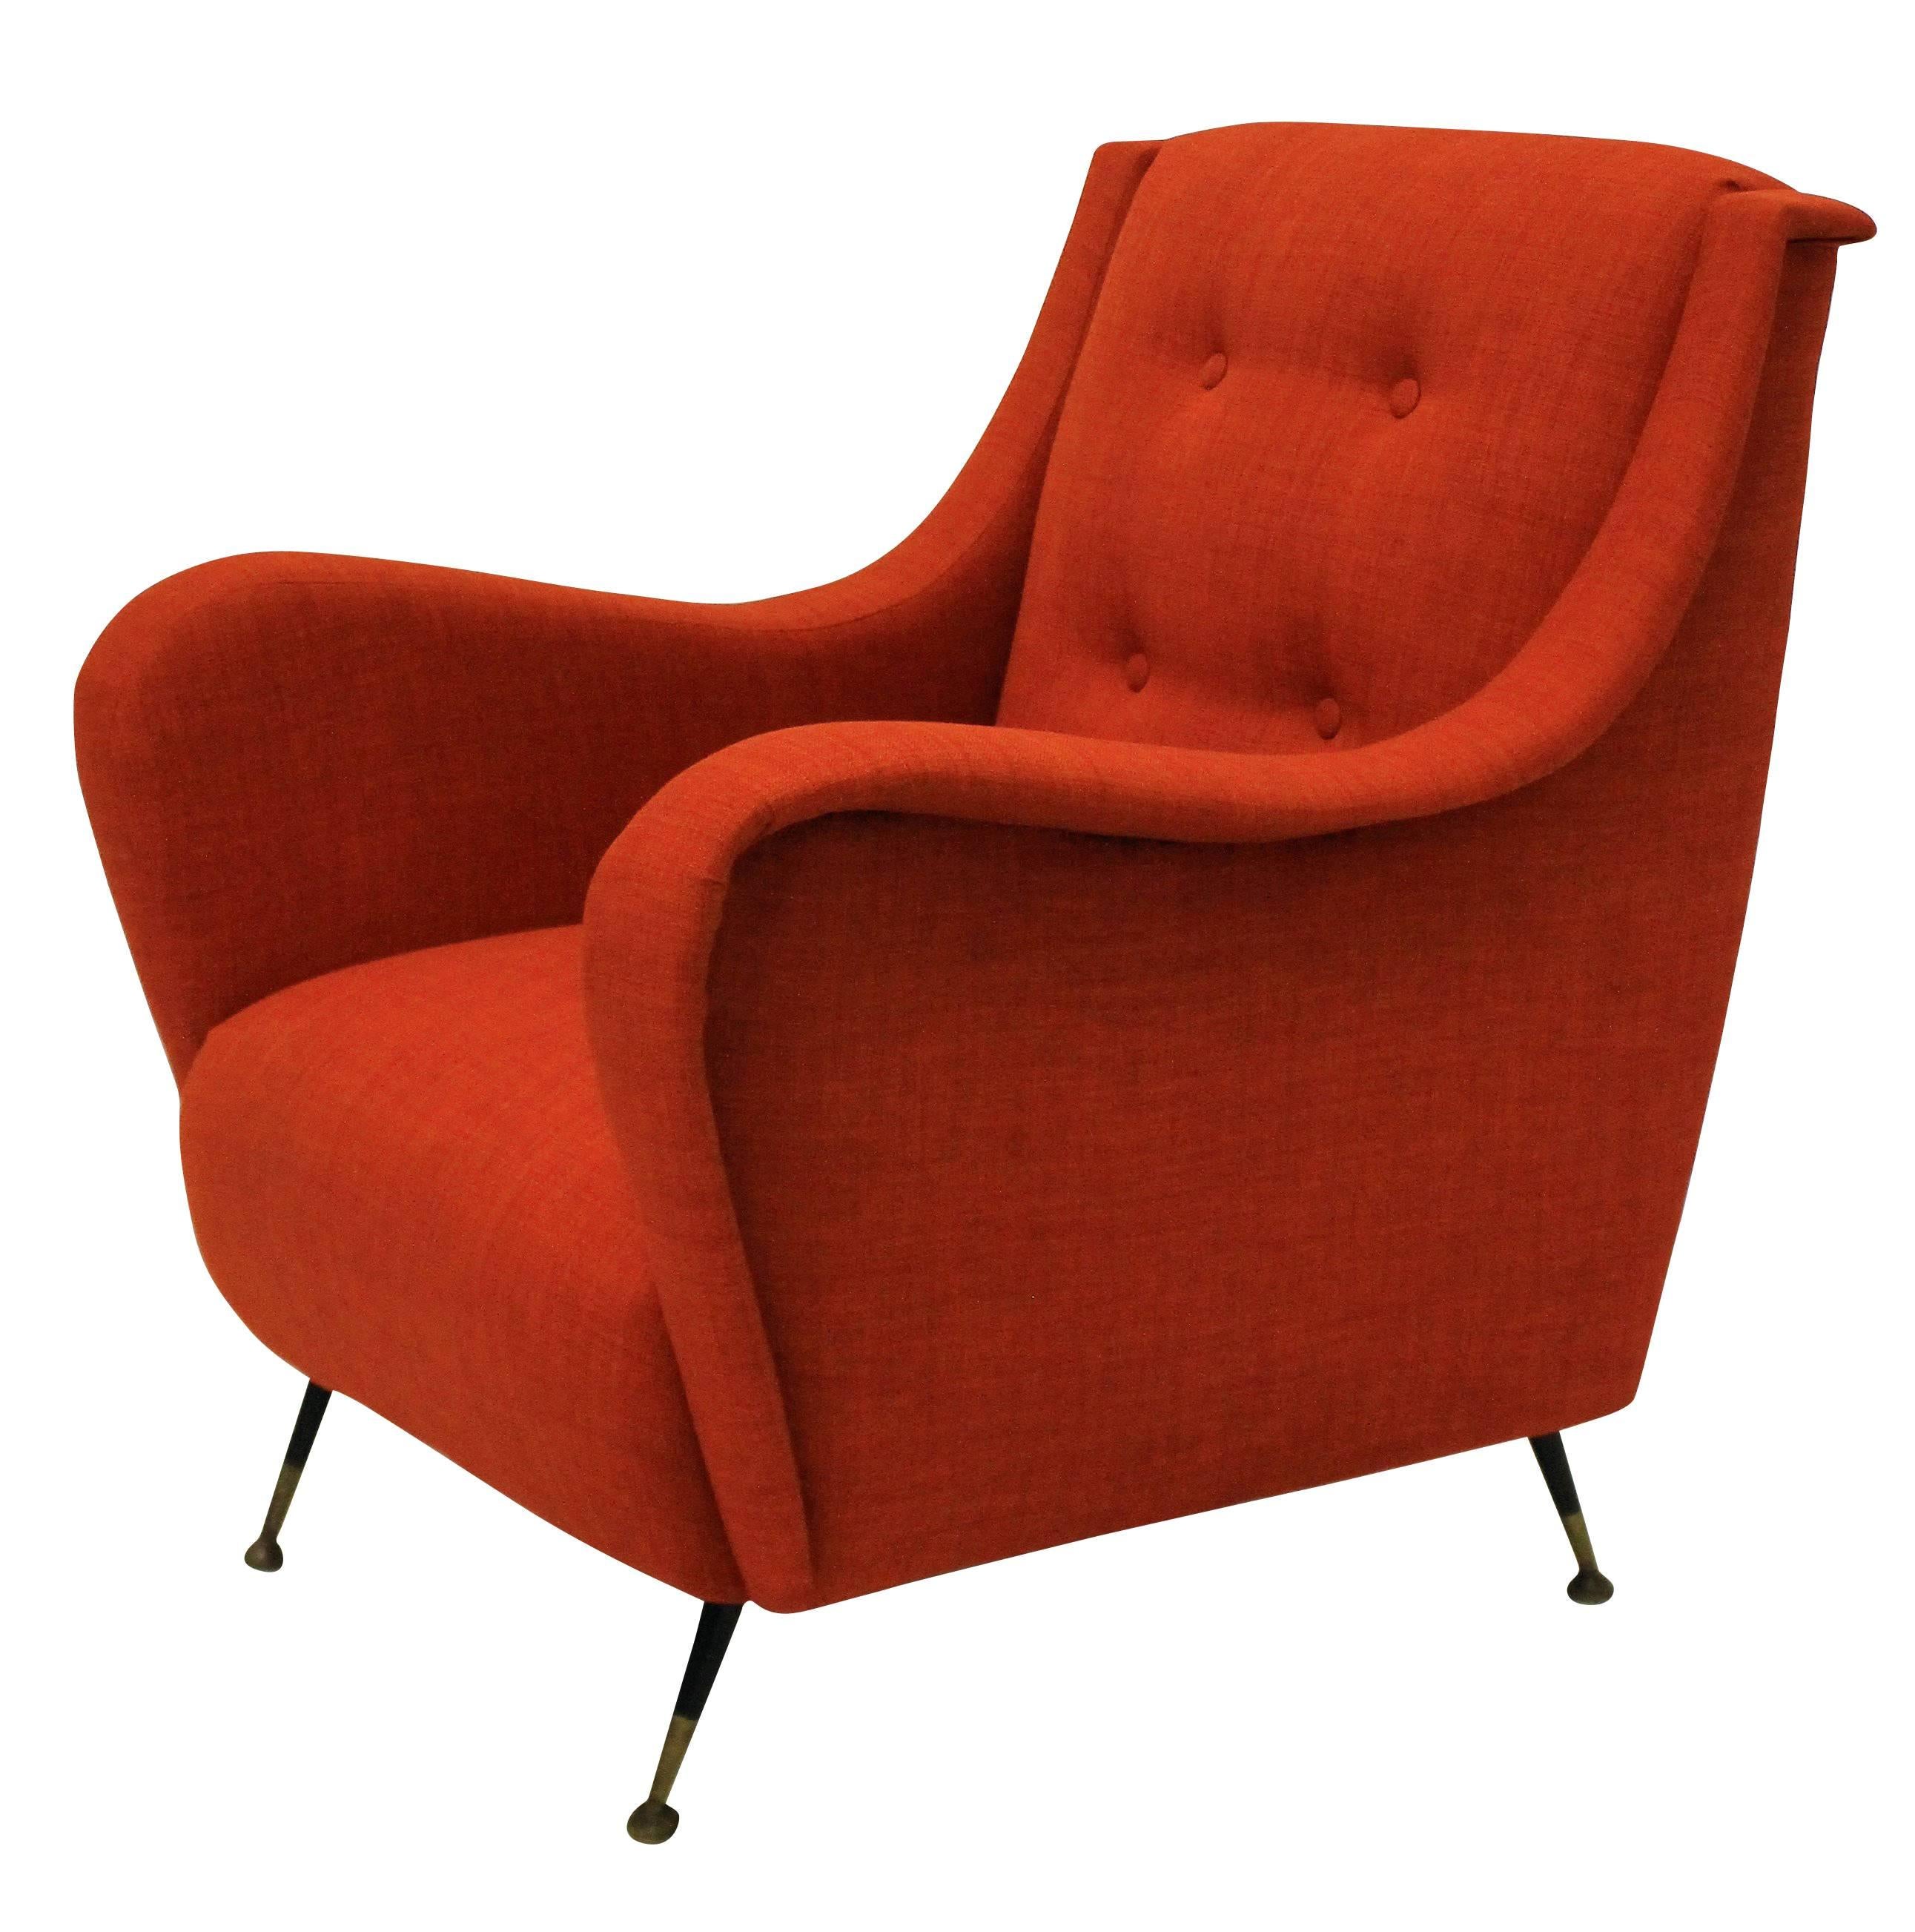 A pair of Italian midcentury armchairs on tapering metal feet. Newly upholstered in a burnt orange twill.